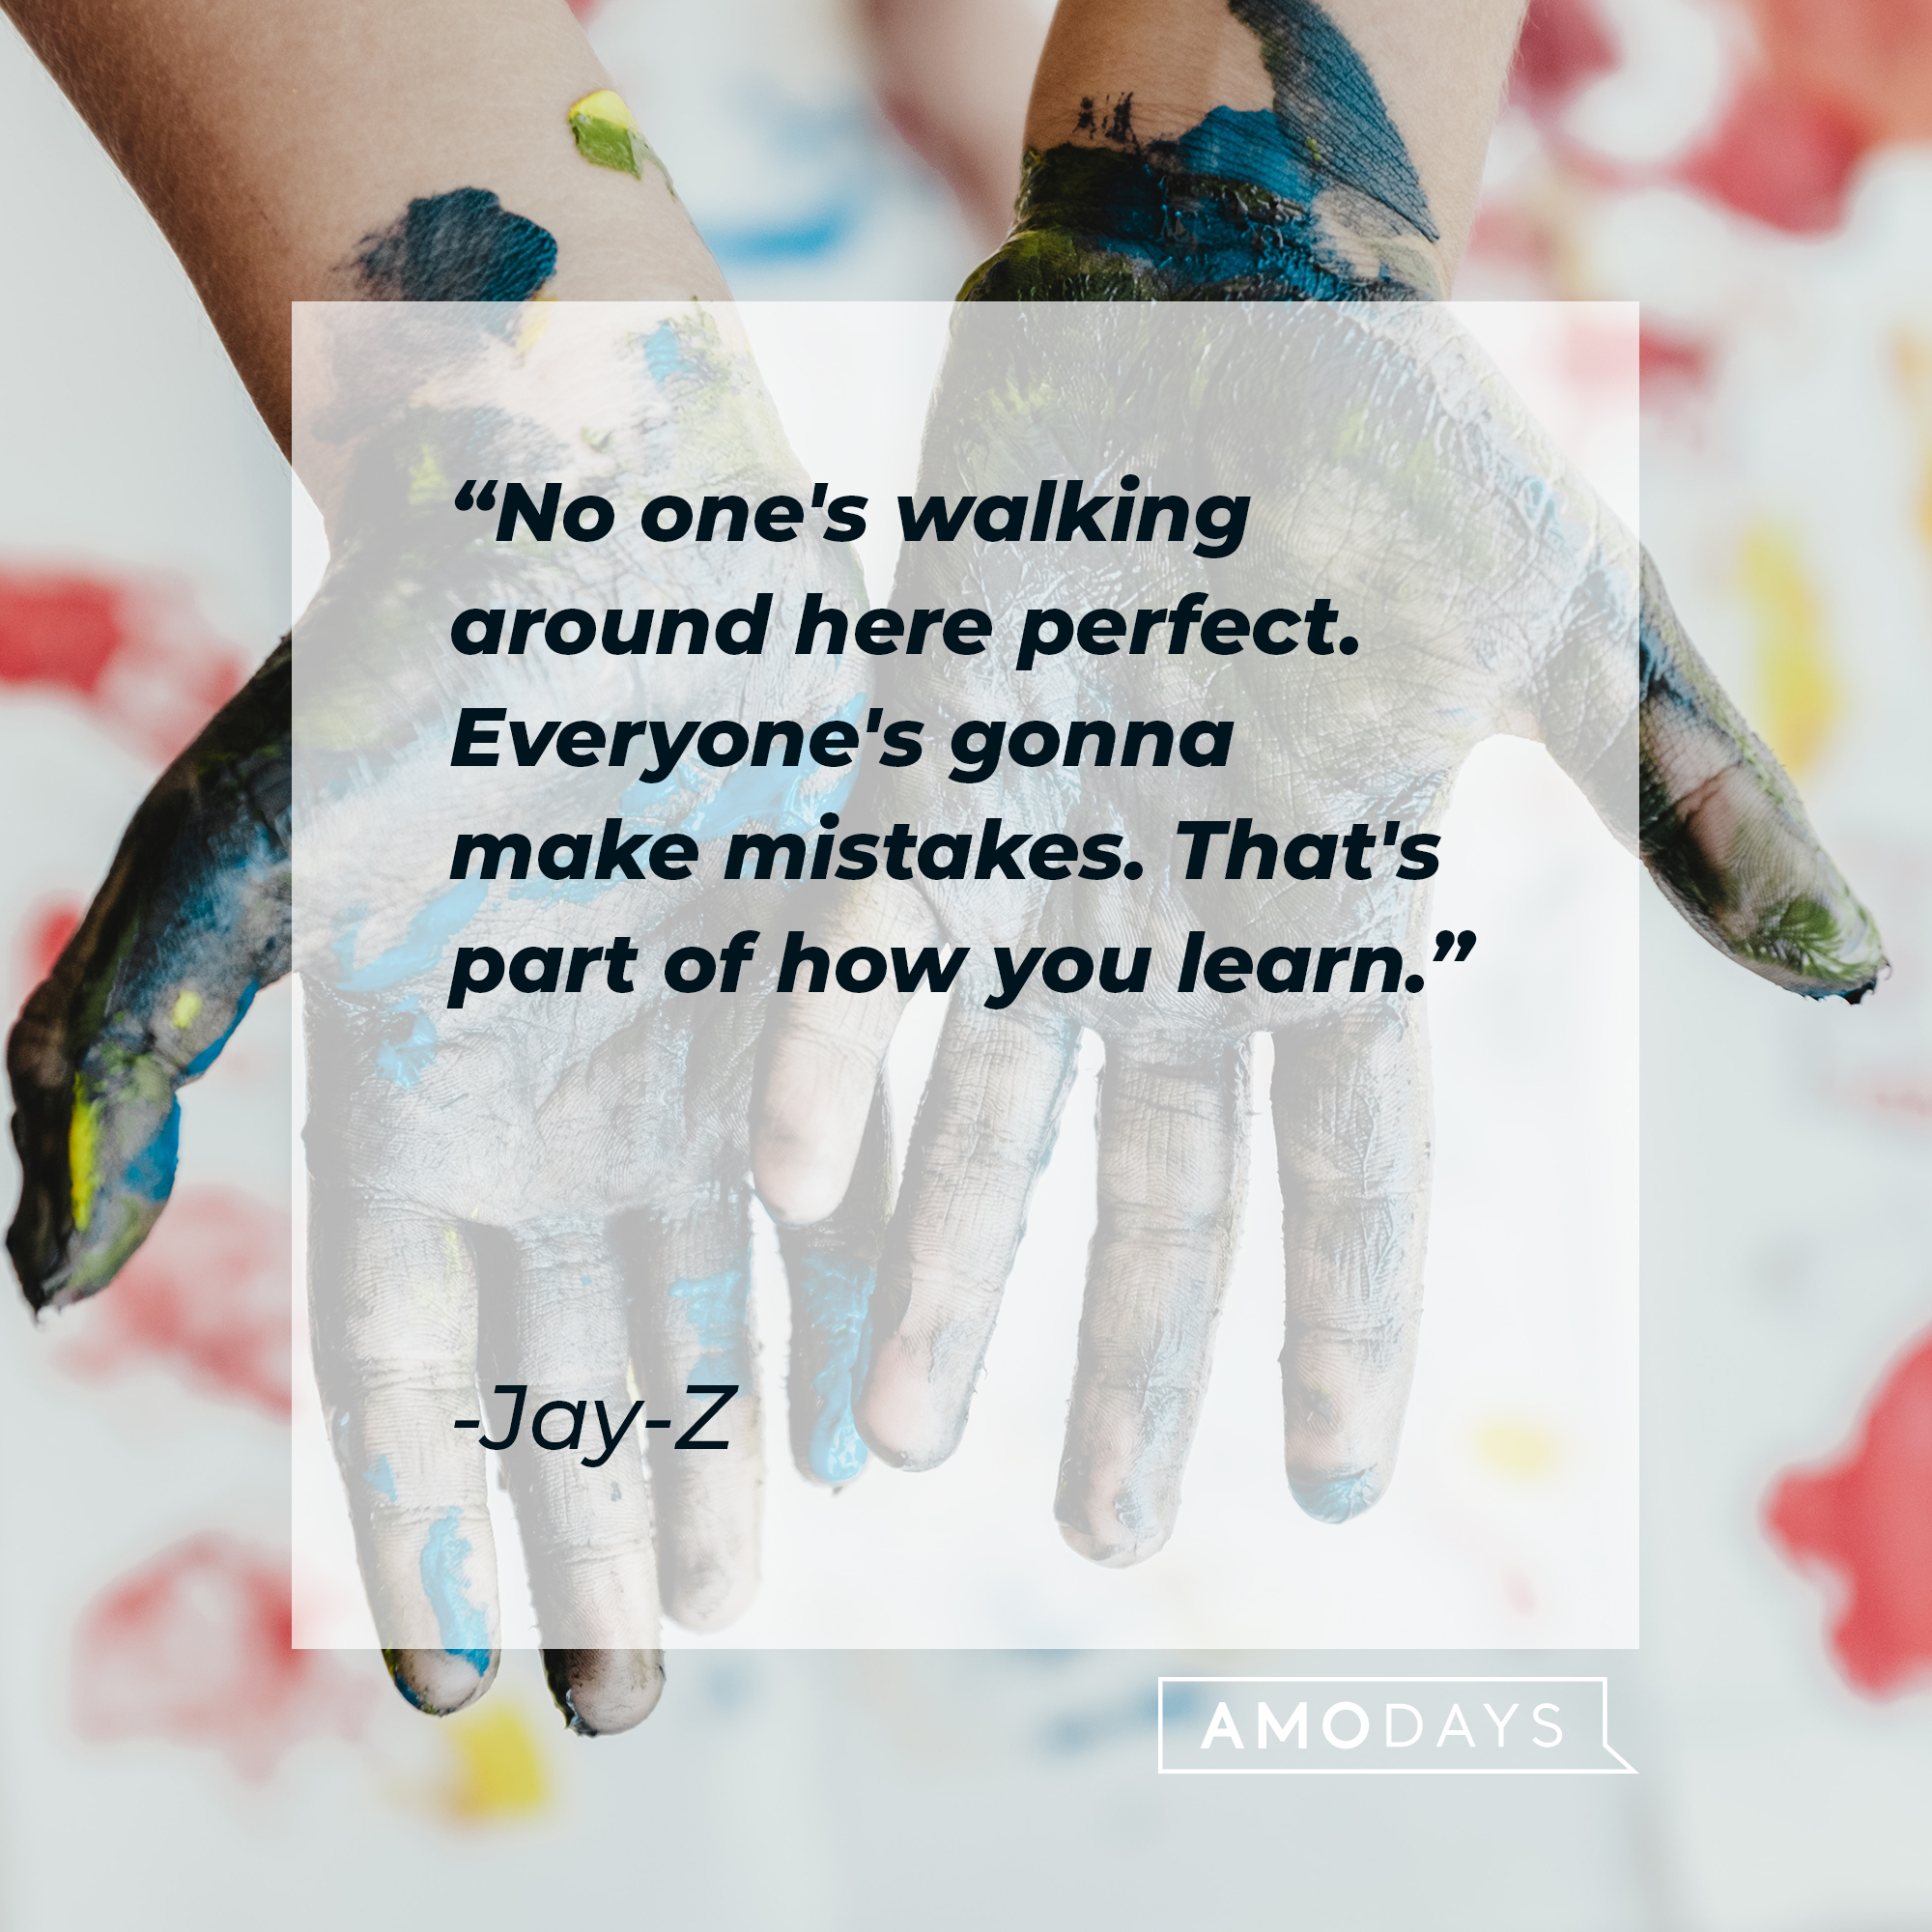 Jay-Z's quote: "No one's walking around here perfect. Everyone's gonna make mistakes. That's part of how you learn." | Image: Unsplash